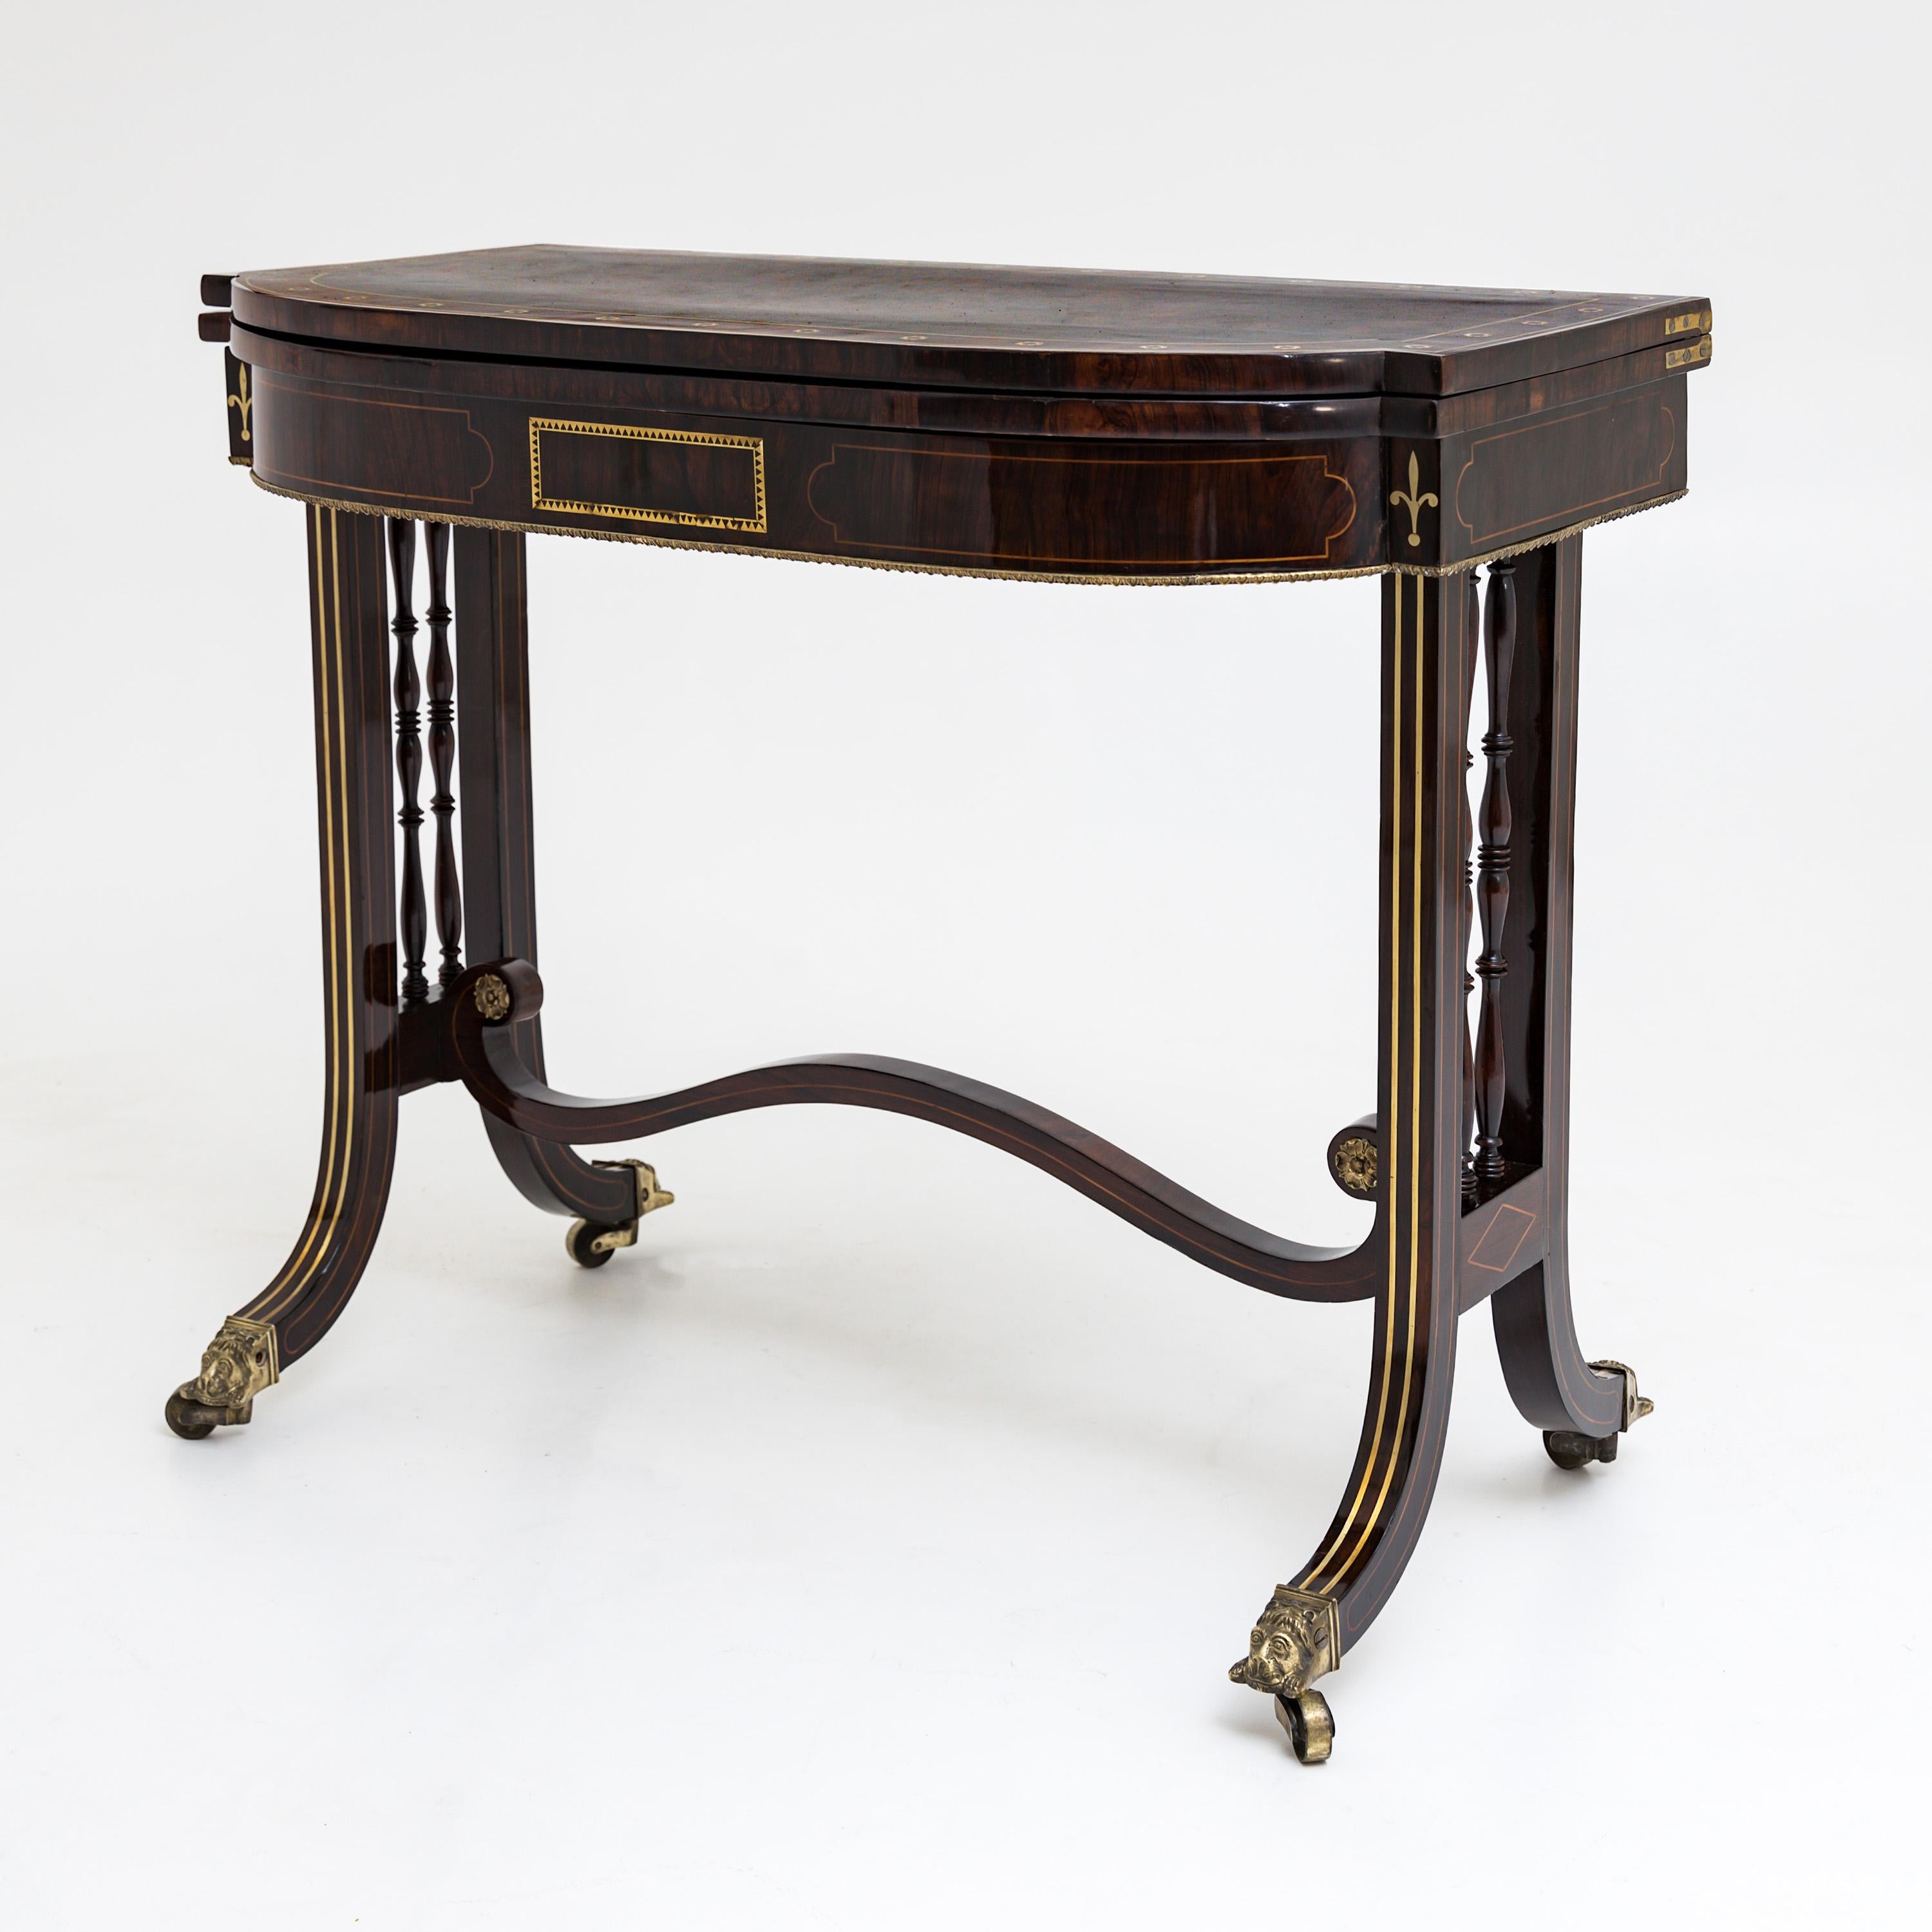 English mahogany console table on wheels with lion heads and brass inlays, turned rods between the legs and a curved intermediate strut. The tabletop is slightly curved at the long sides and covered with green felt on the inside. There is storage